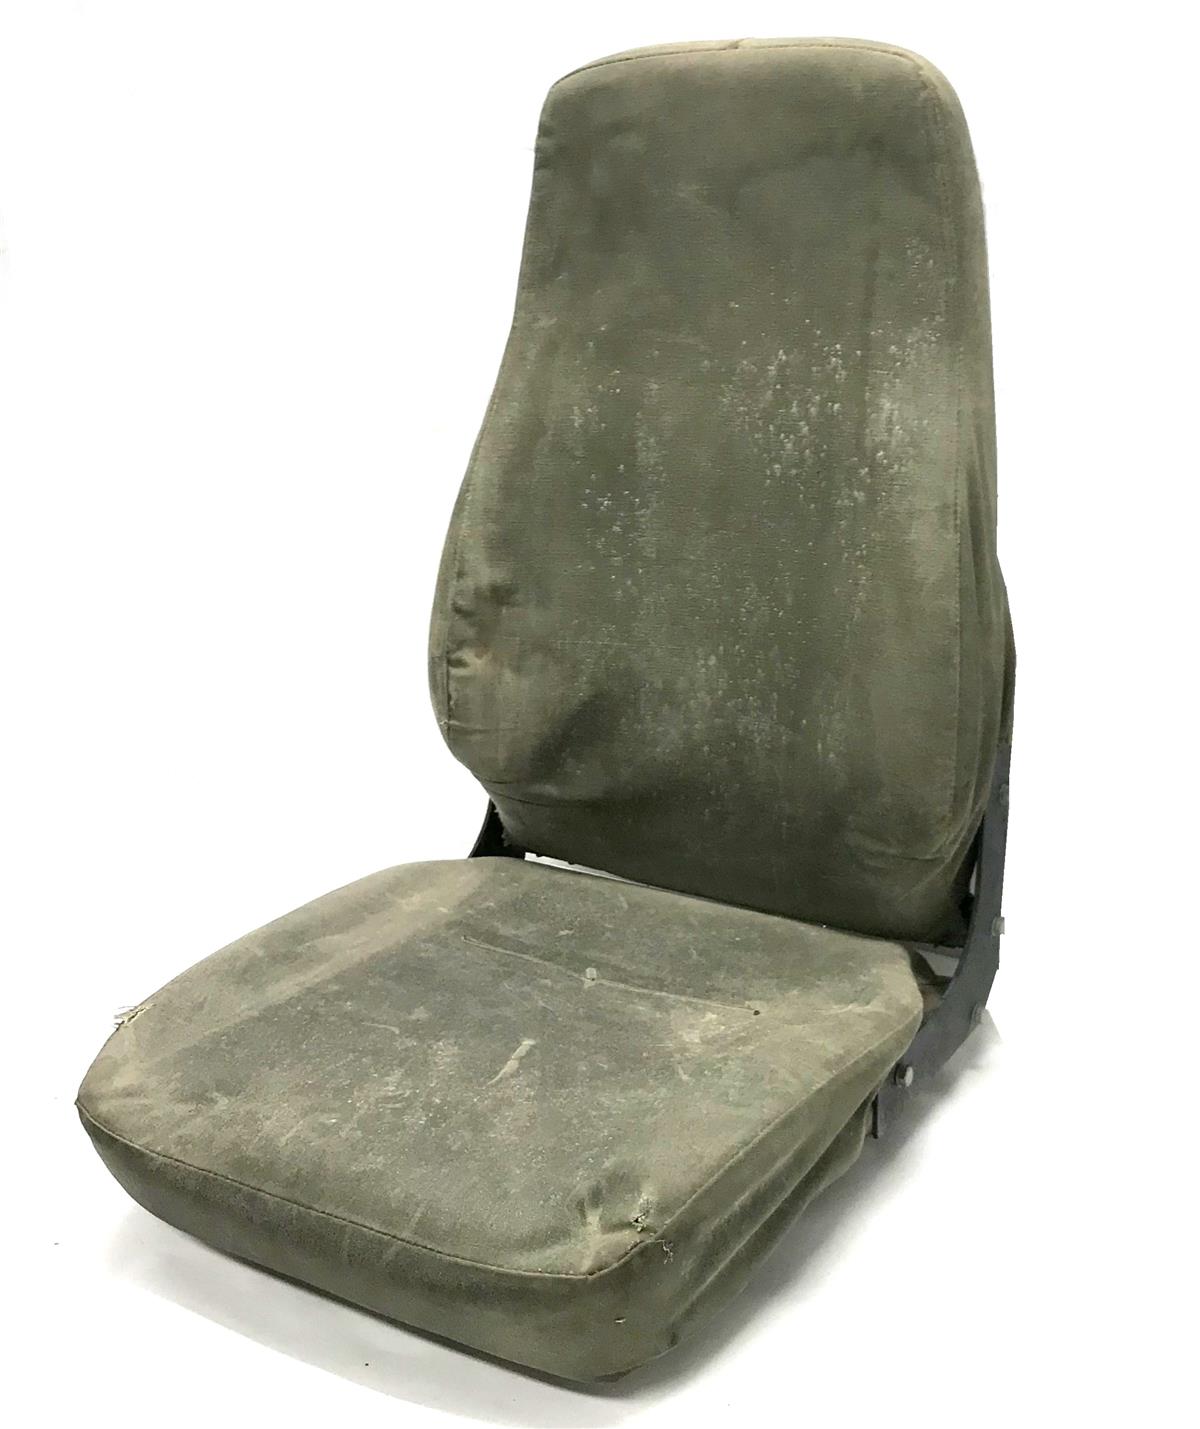 HM-131 | HM-131  HMMWV Seat - Driver Front and Passenger Rear Positions  (4).jpg